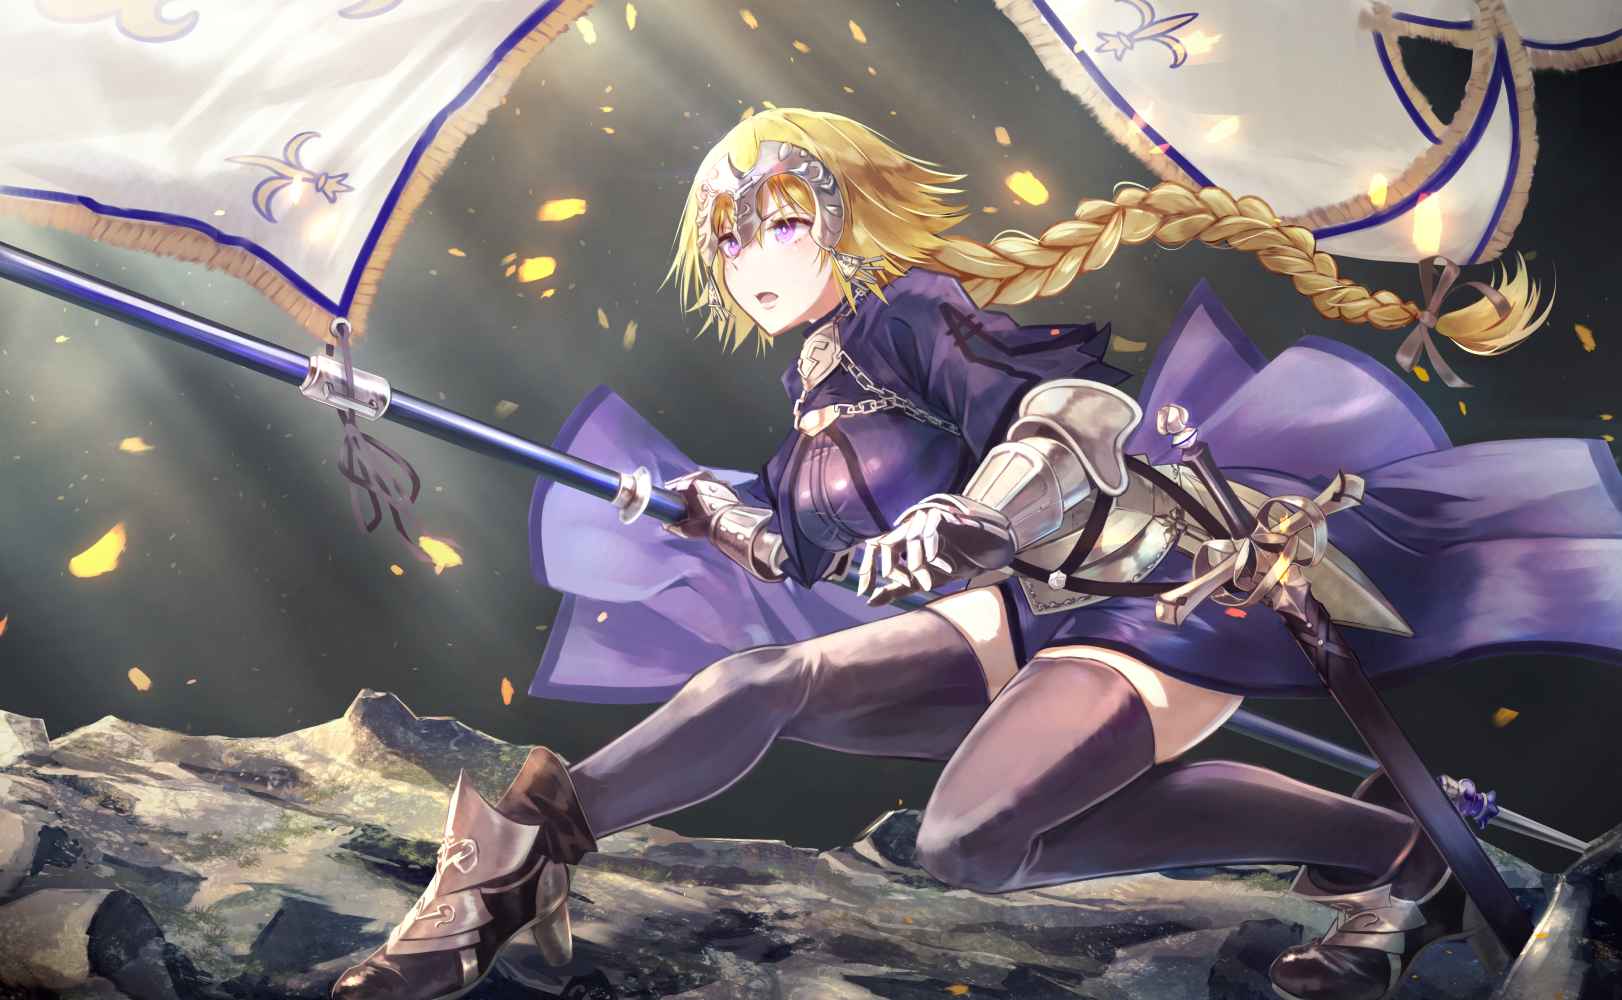 46 Fate Apocrypha Hd Wallpapers Background Images Wallpaper Abyss